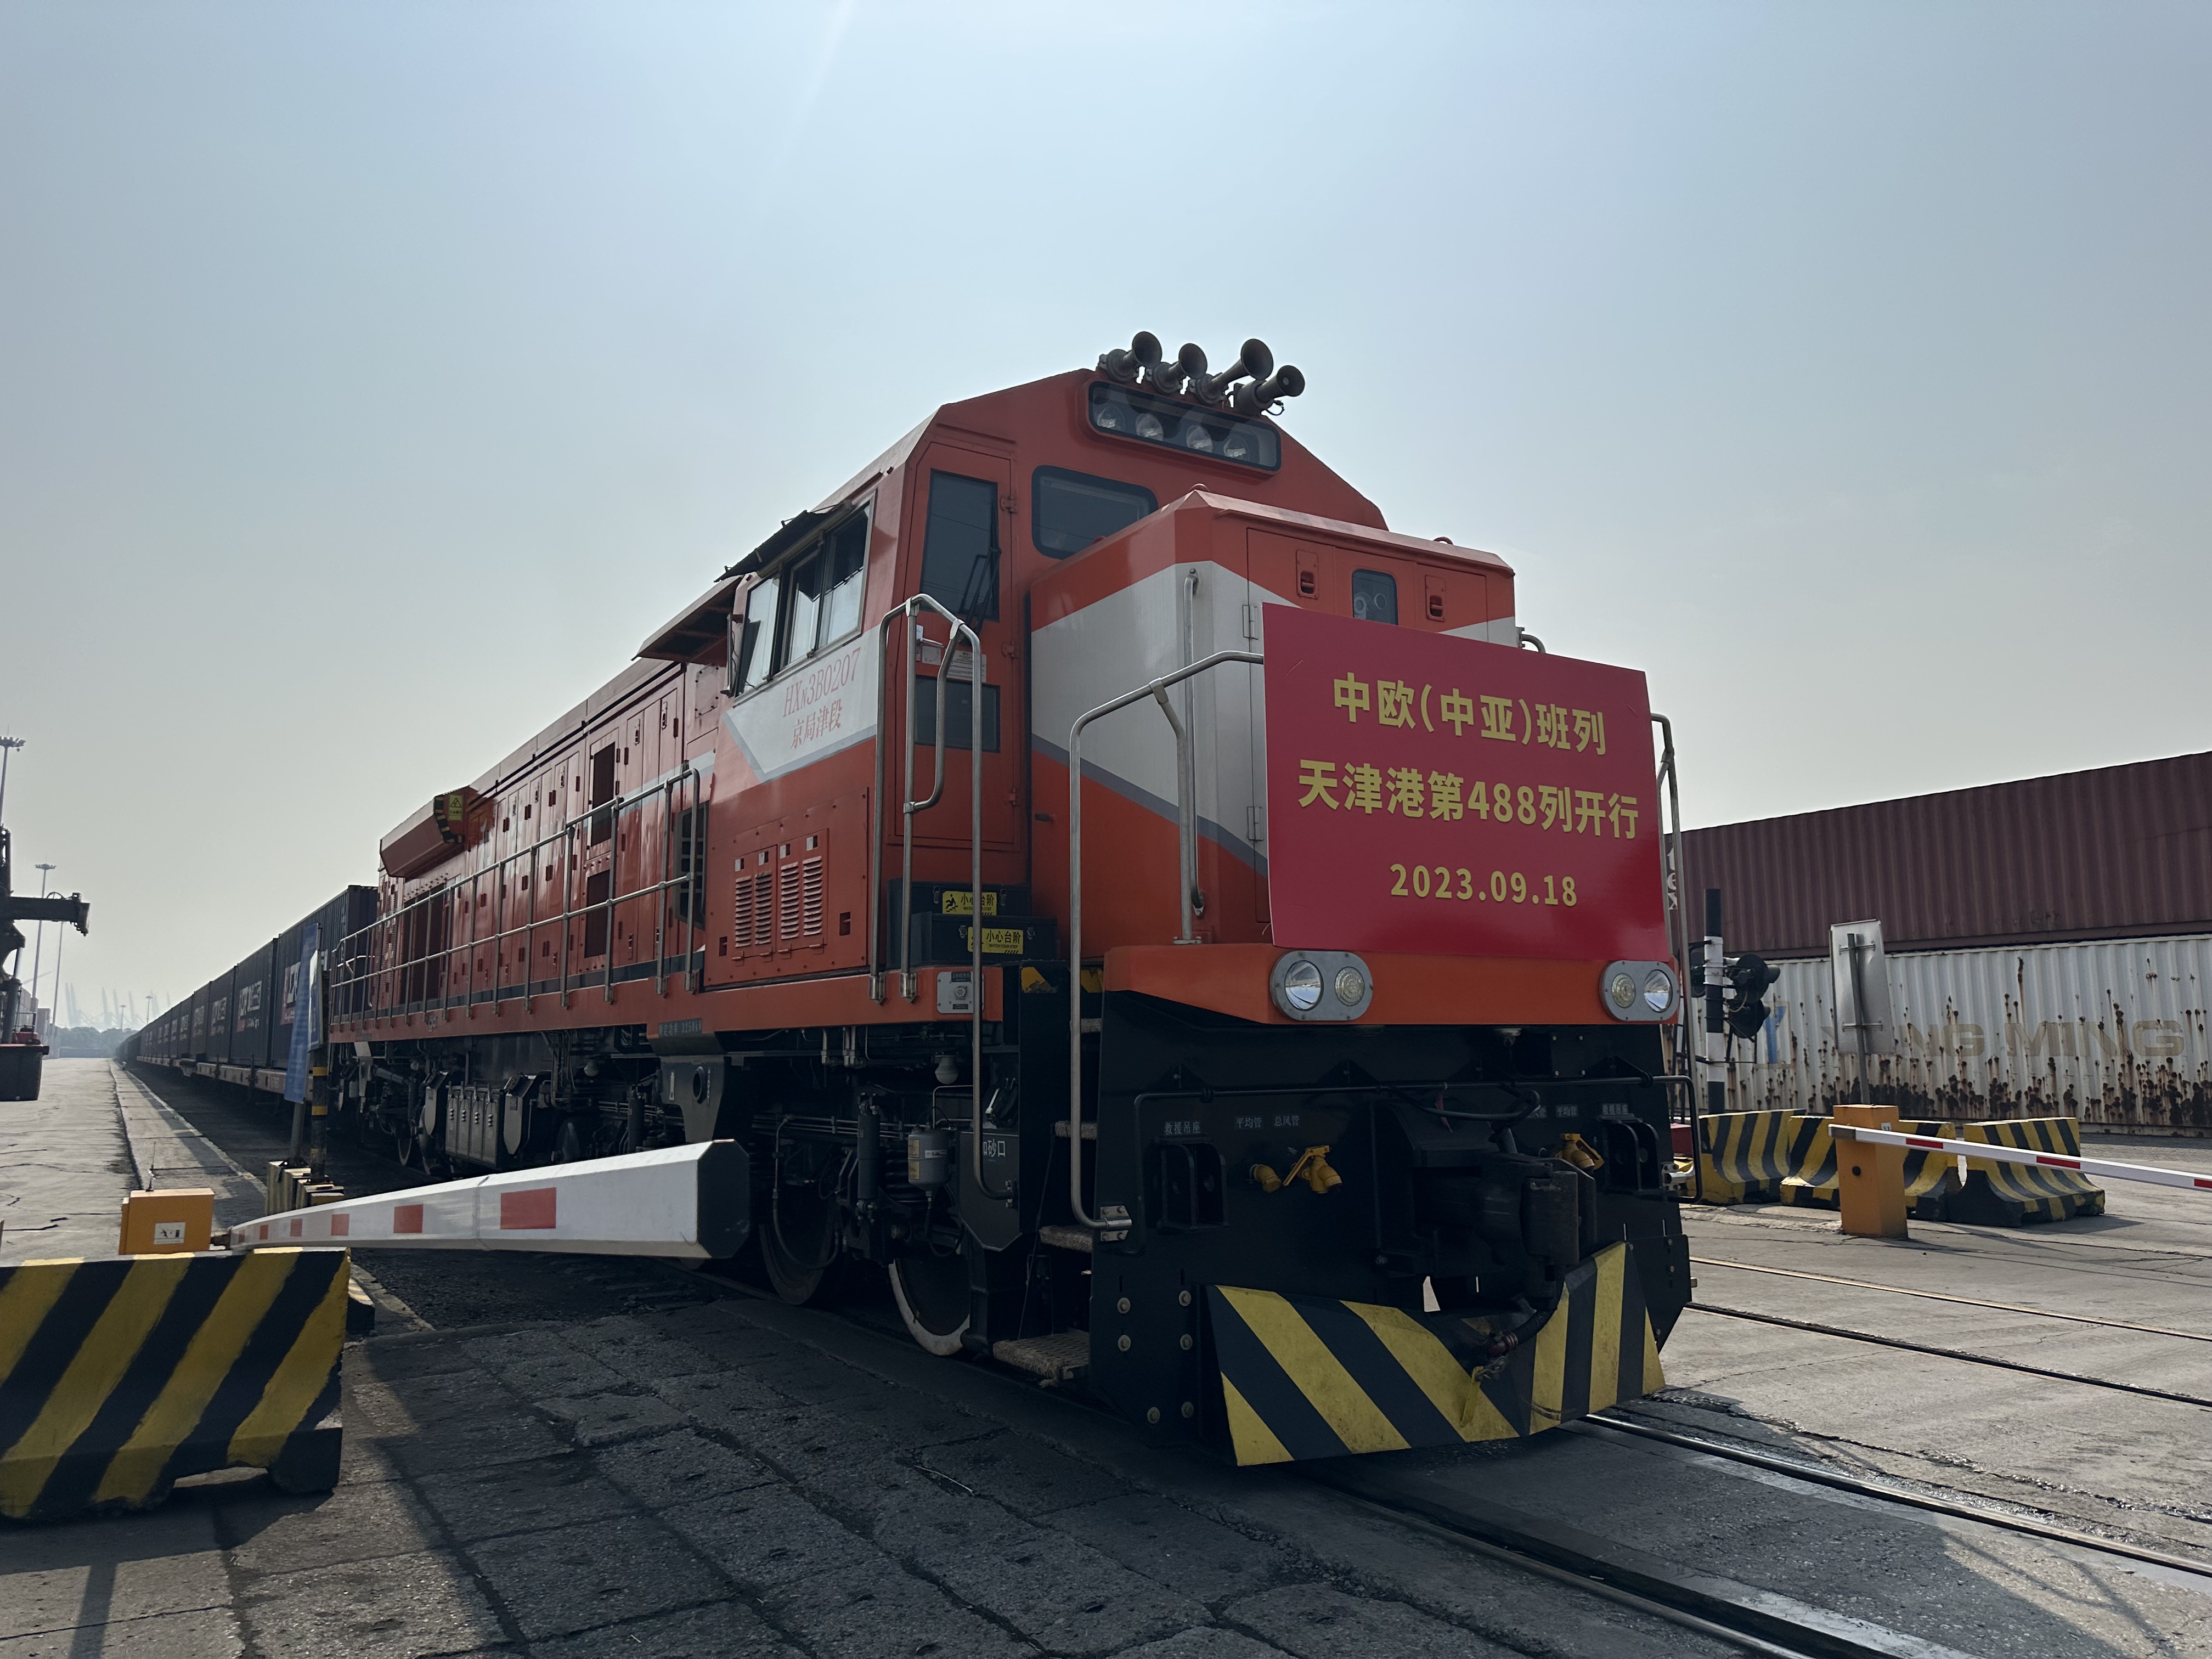 The 488th China-Europe Express Railroad train is about to depart on Sunday at Tianjin port, north China's Tianjin Municipality, September 18, 2023. /CGTN